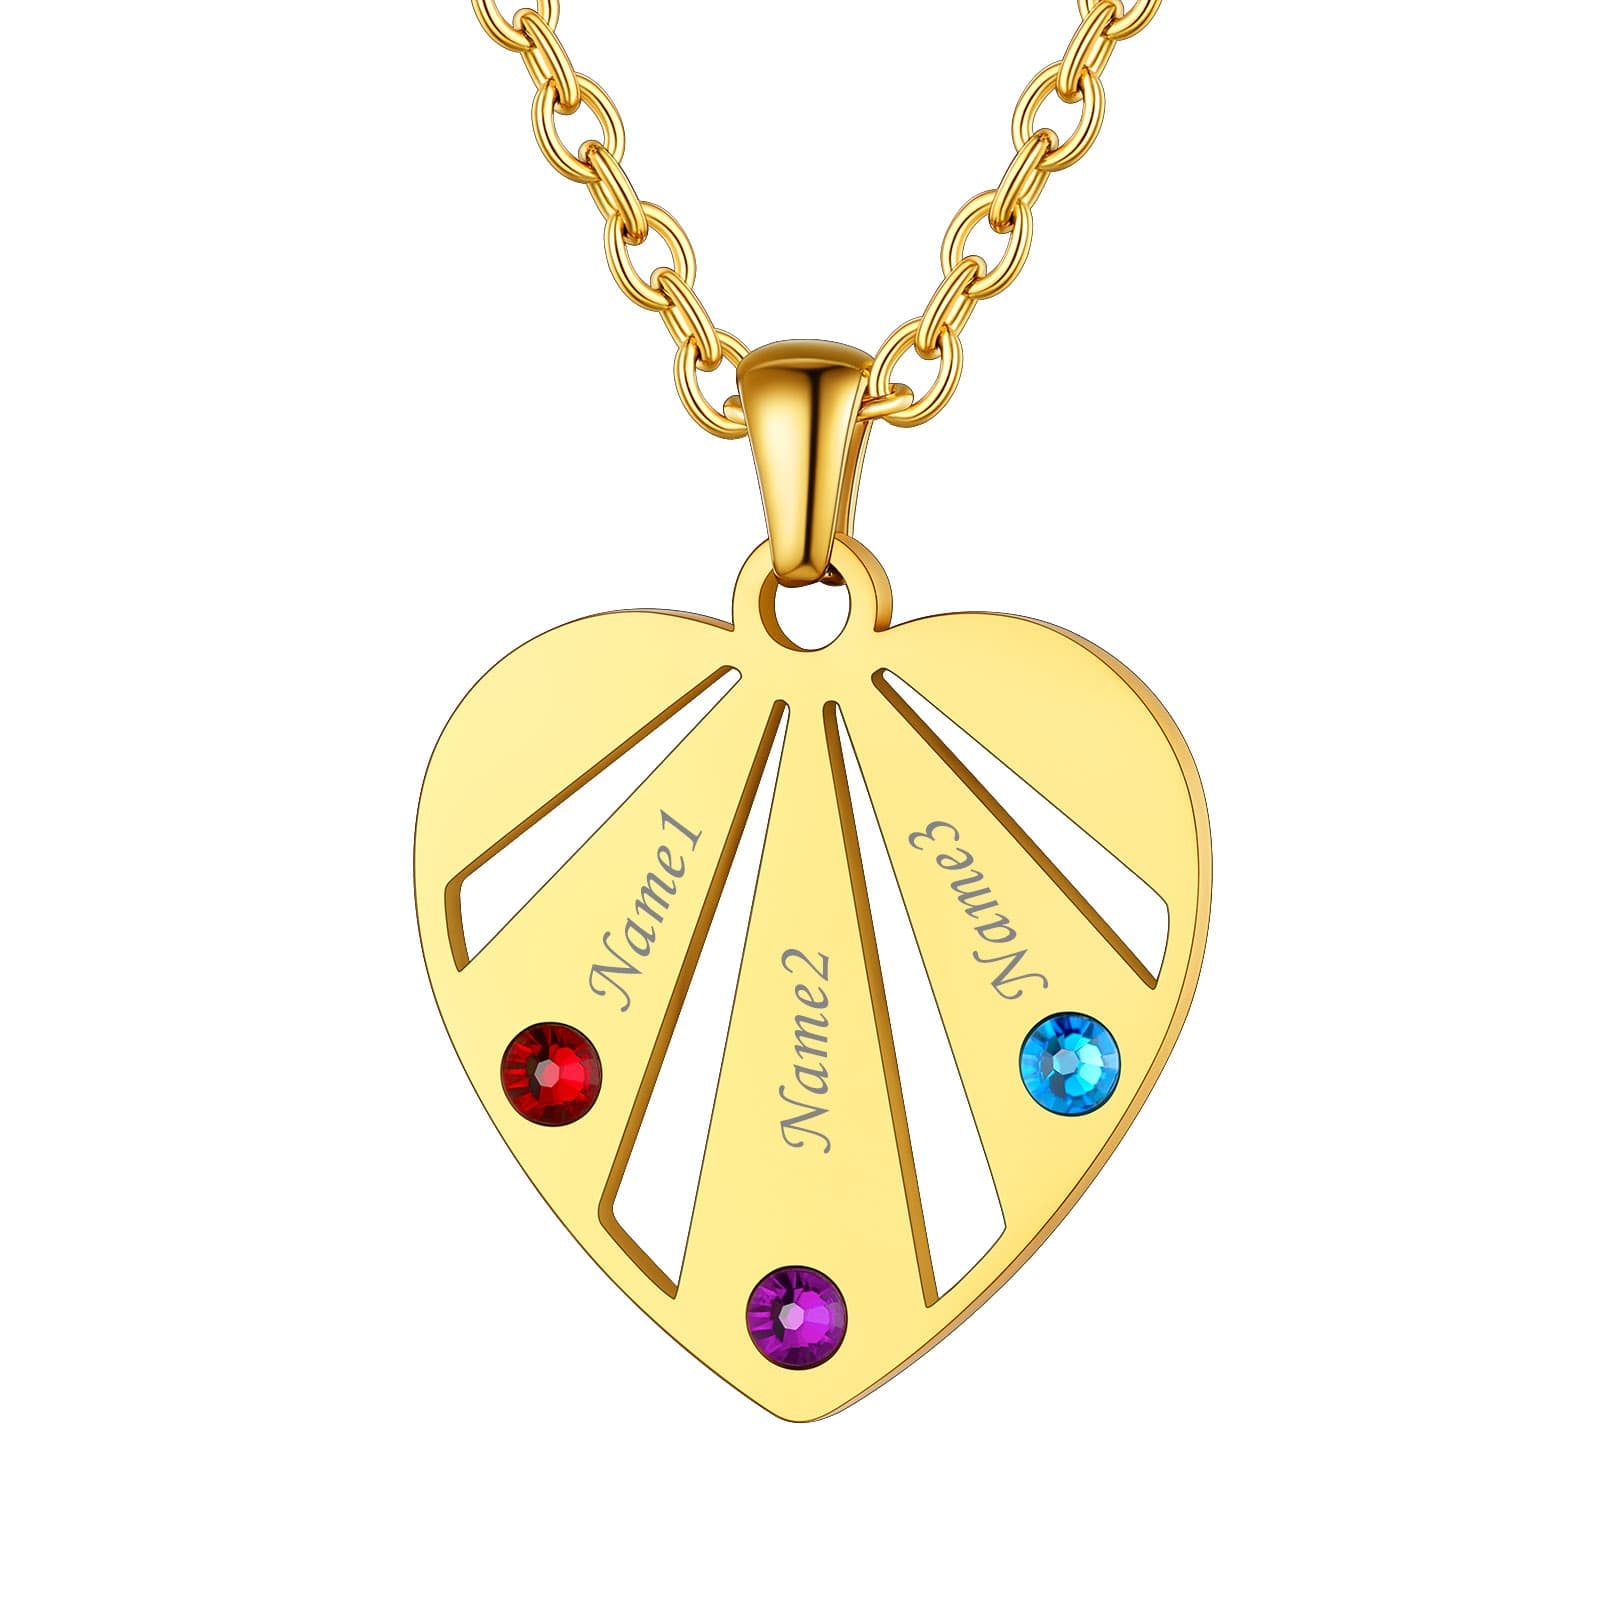 Personalized Engraved Heart Birthstone Necklace gold 3 stones